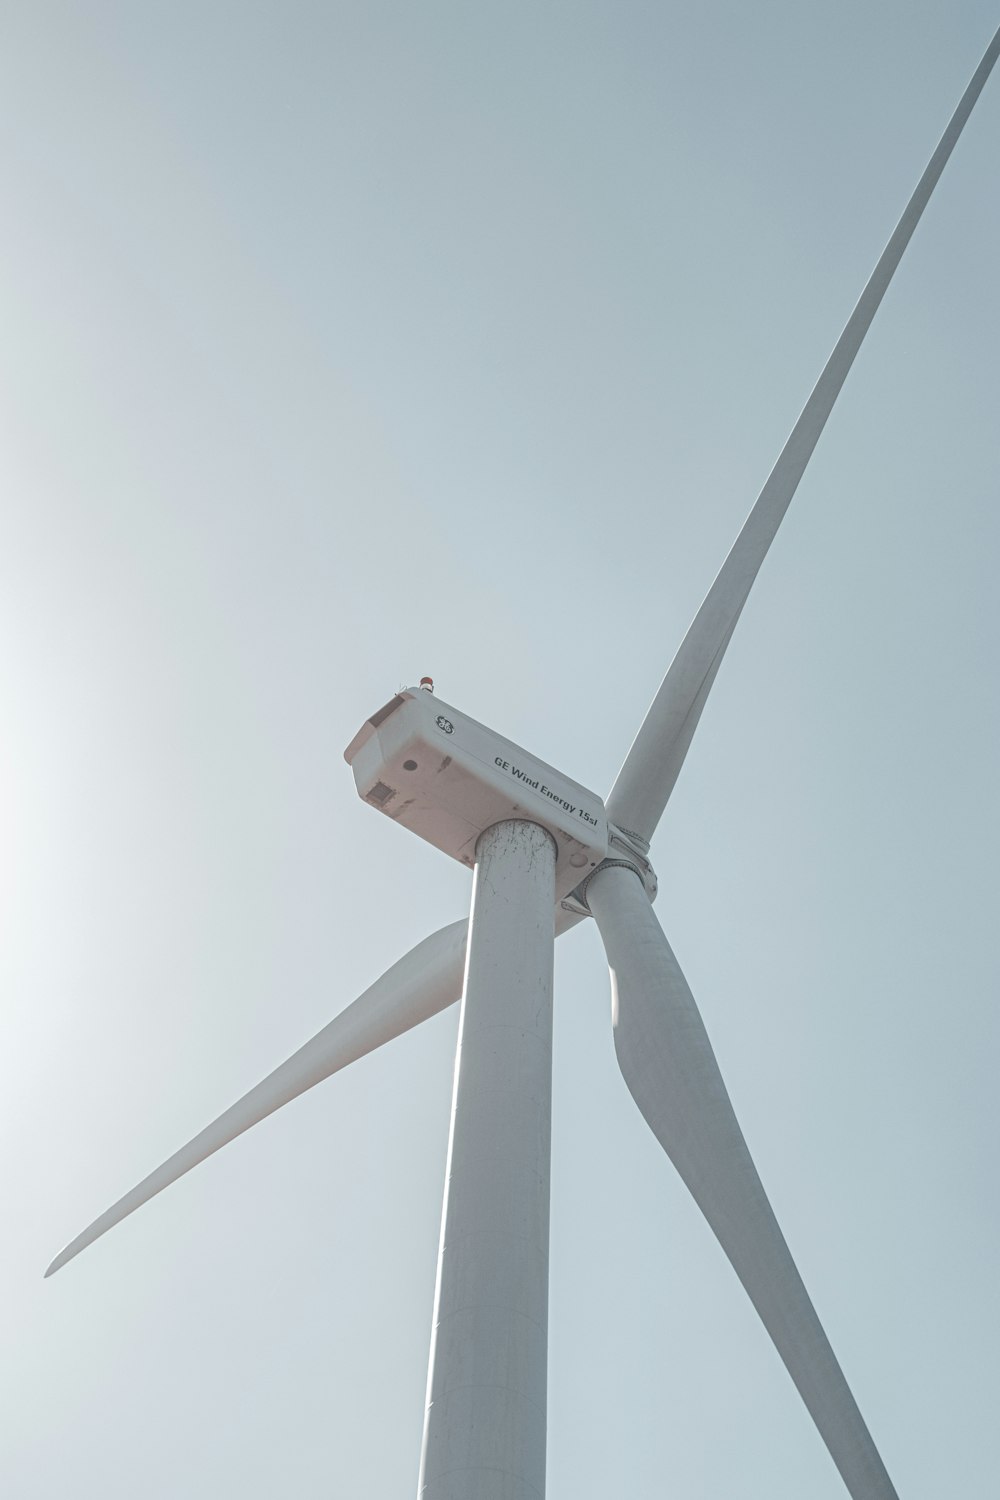 a close up of a wind turbine on a sunny day